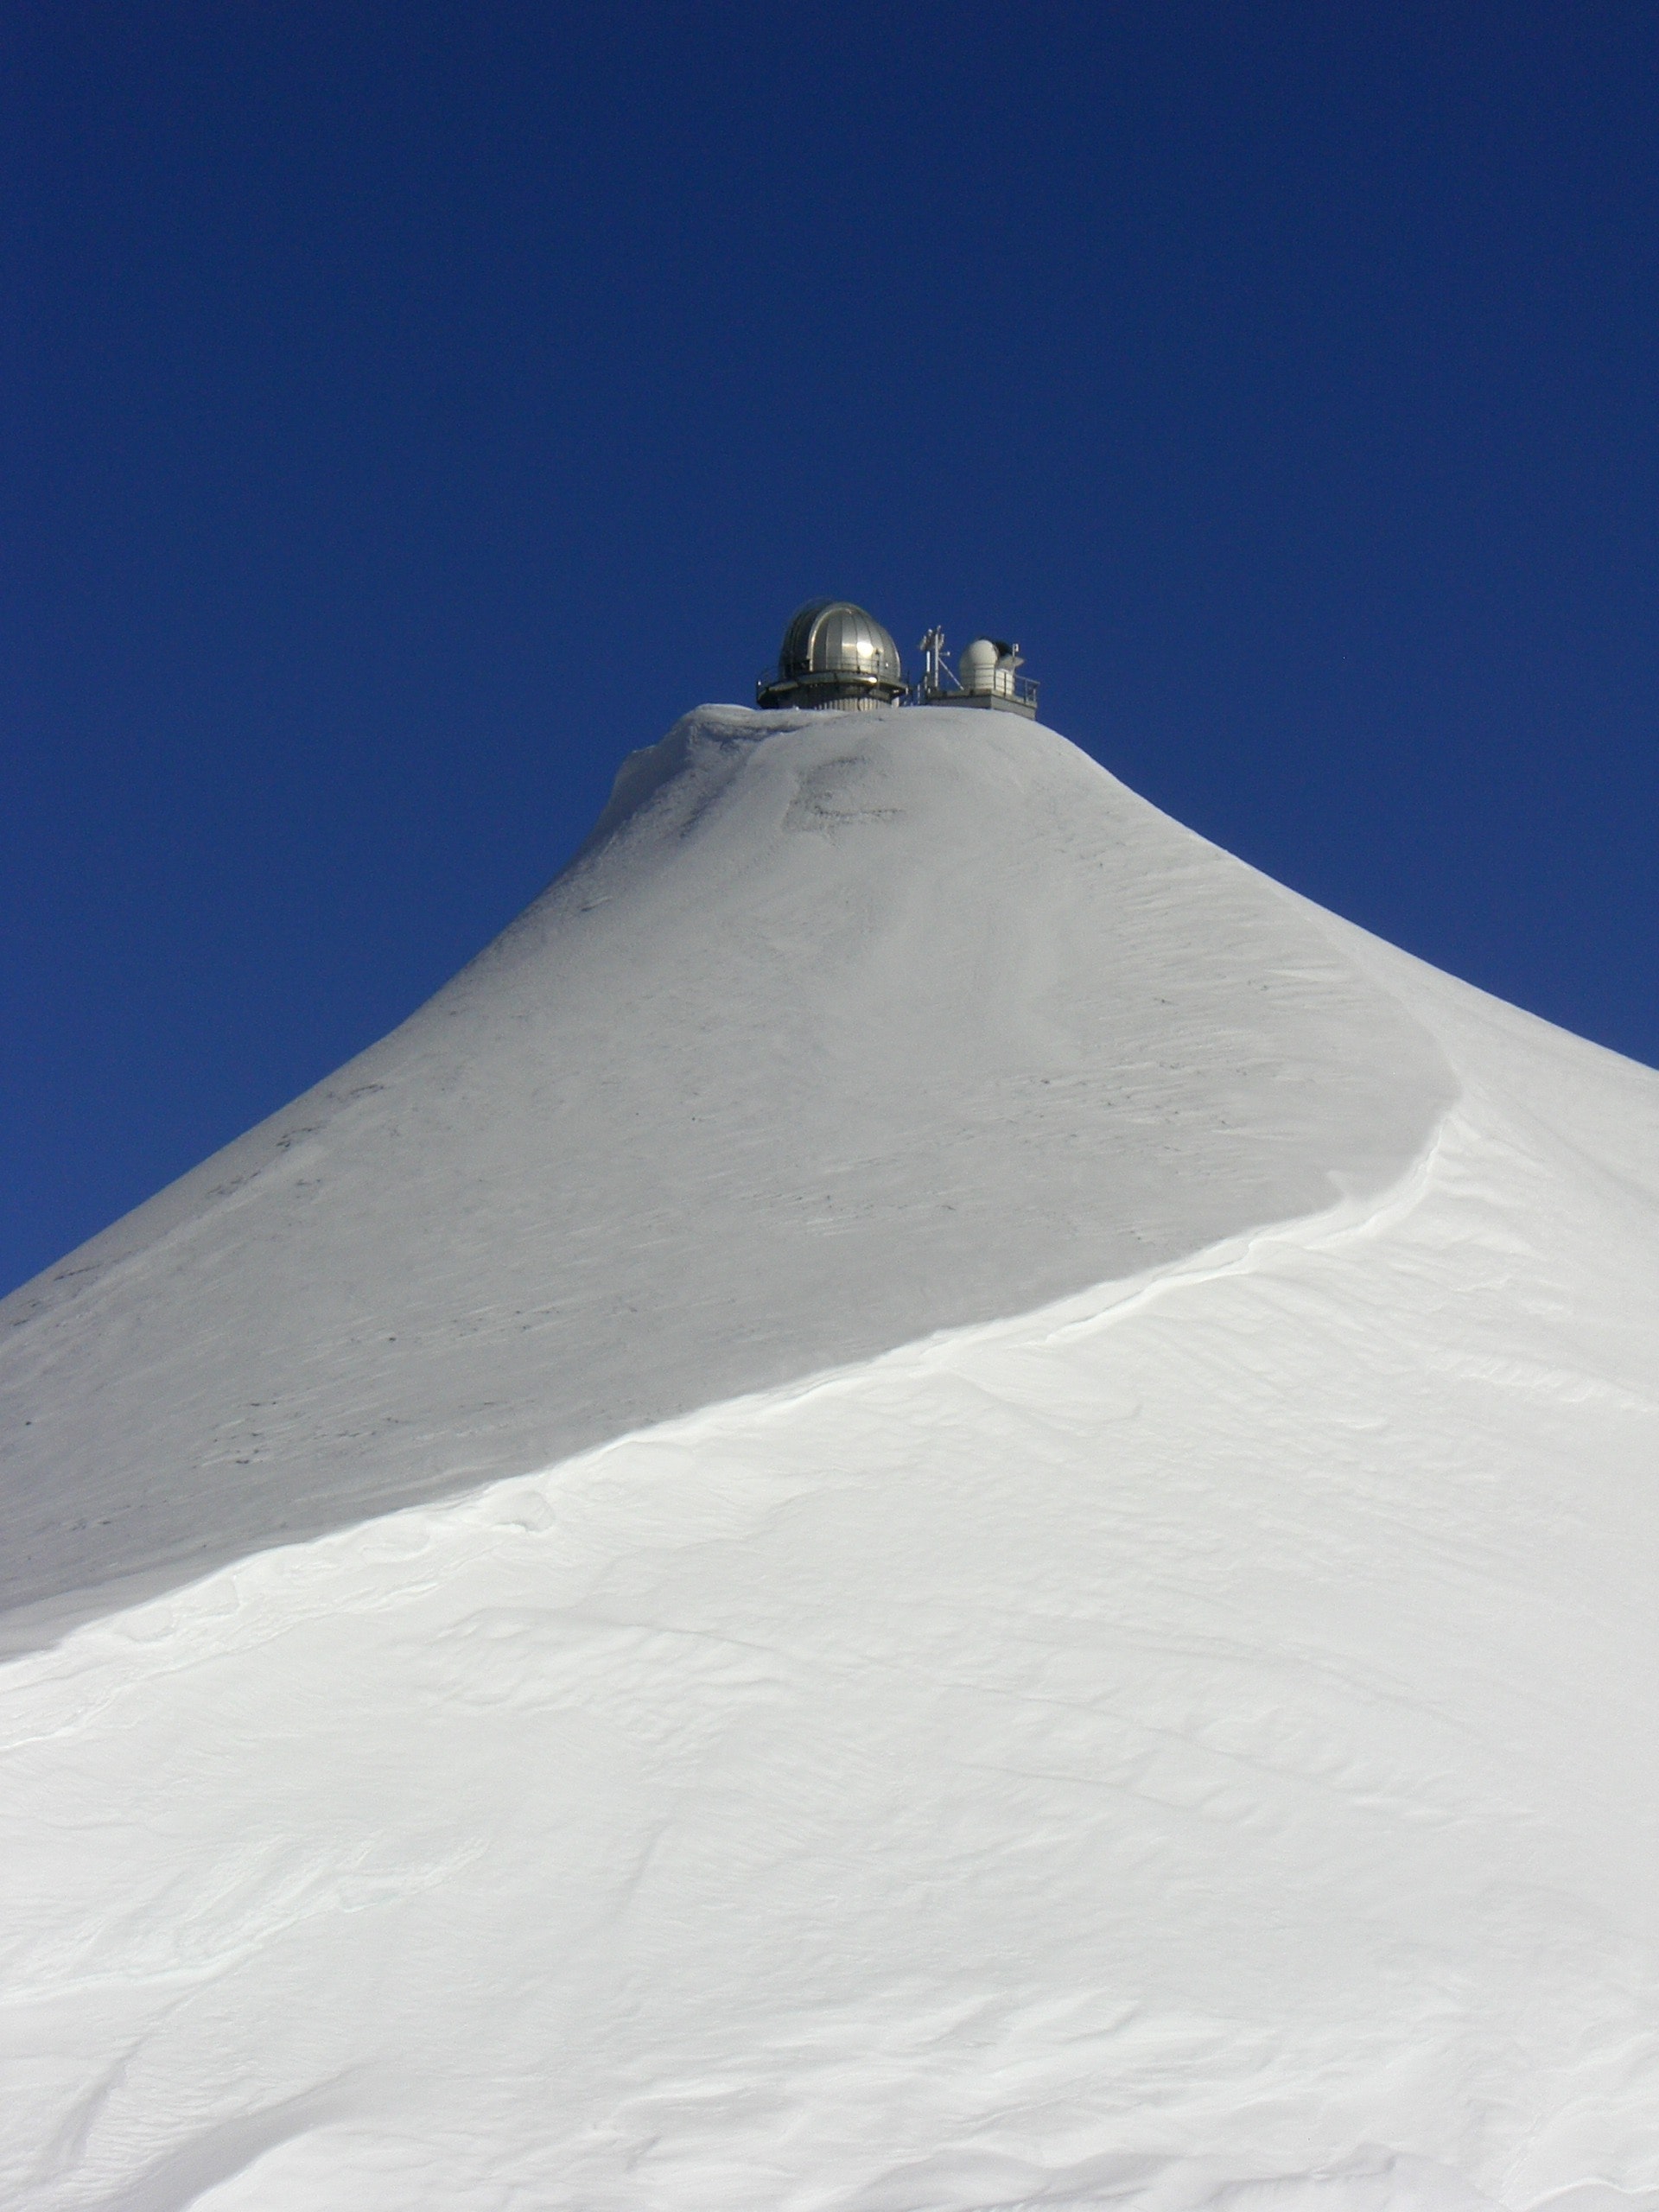 Gray round weather device on top of snow coated mountain during daytime photo